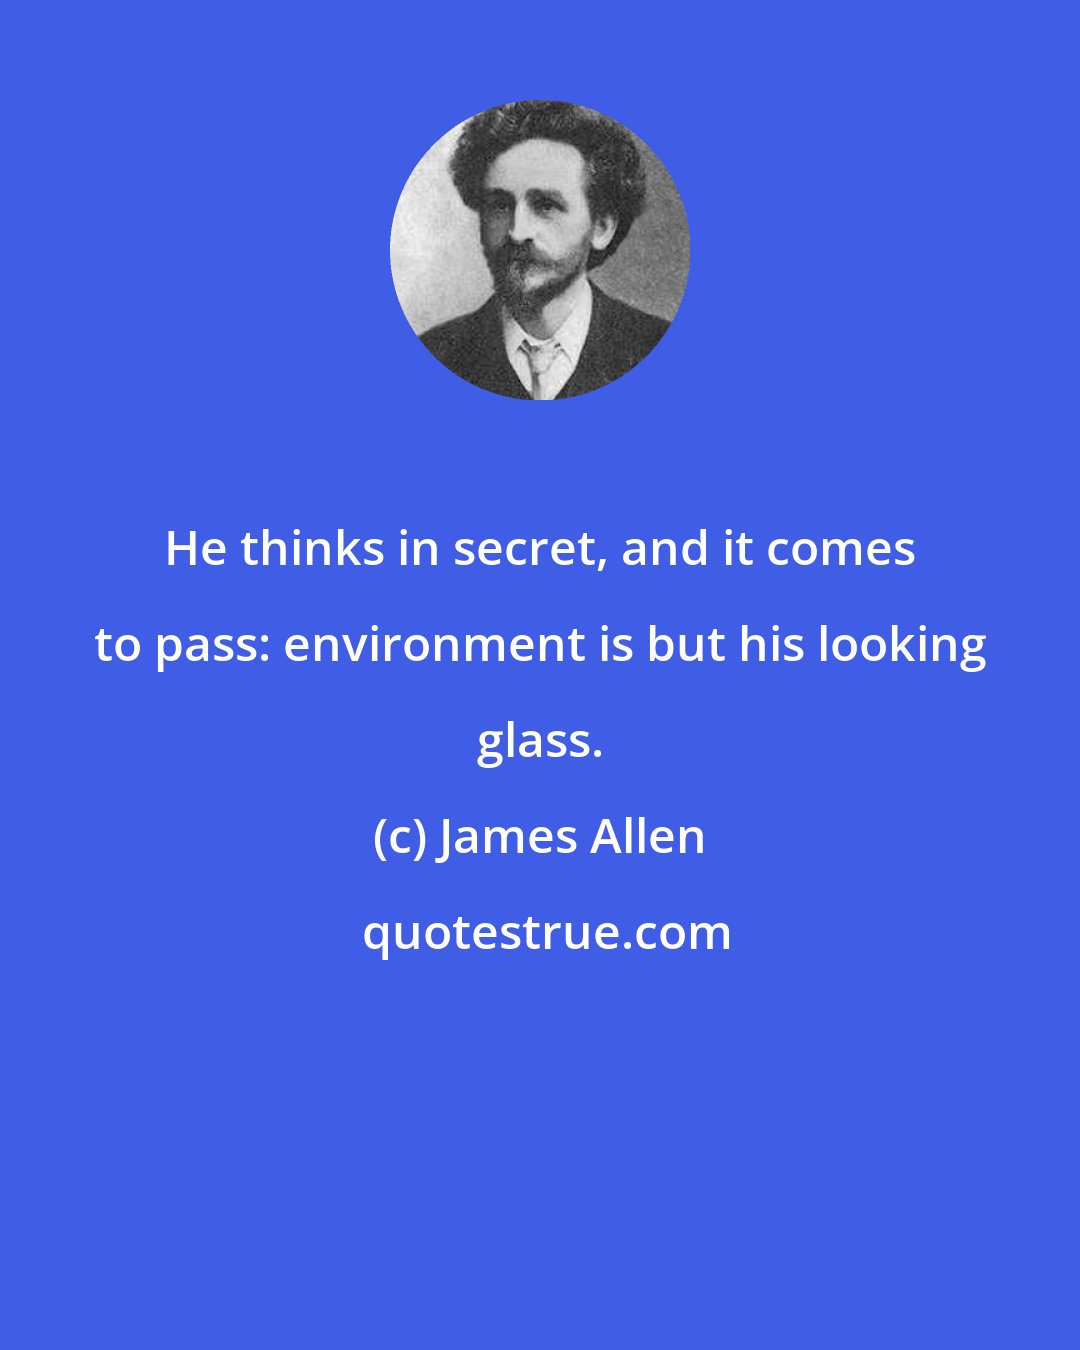 James Allen: He thinks in secret, and it comes to pass: environment is but his looking glass.